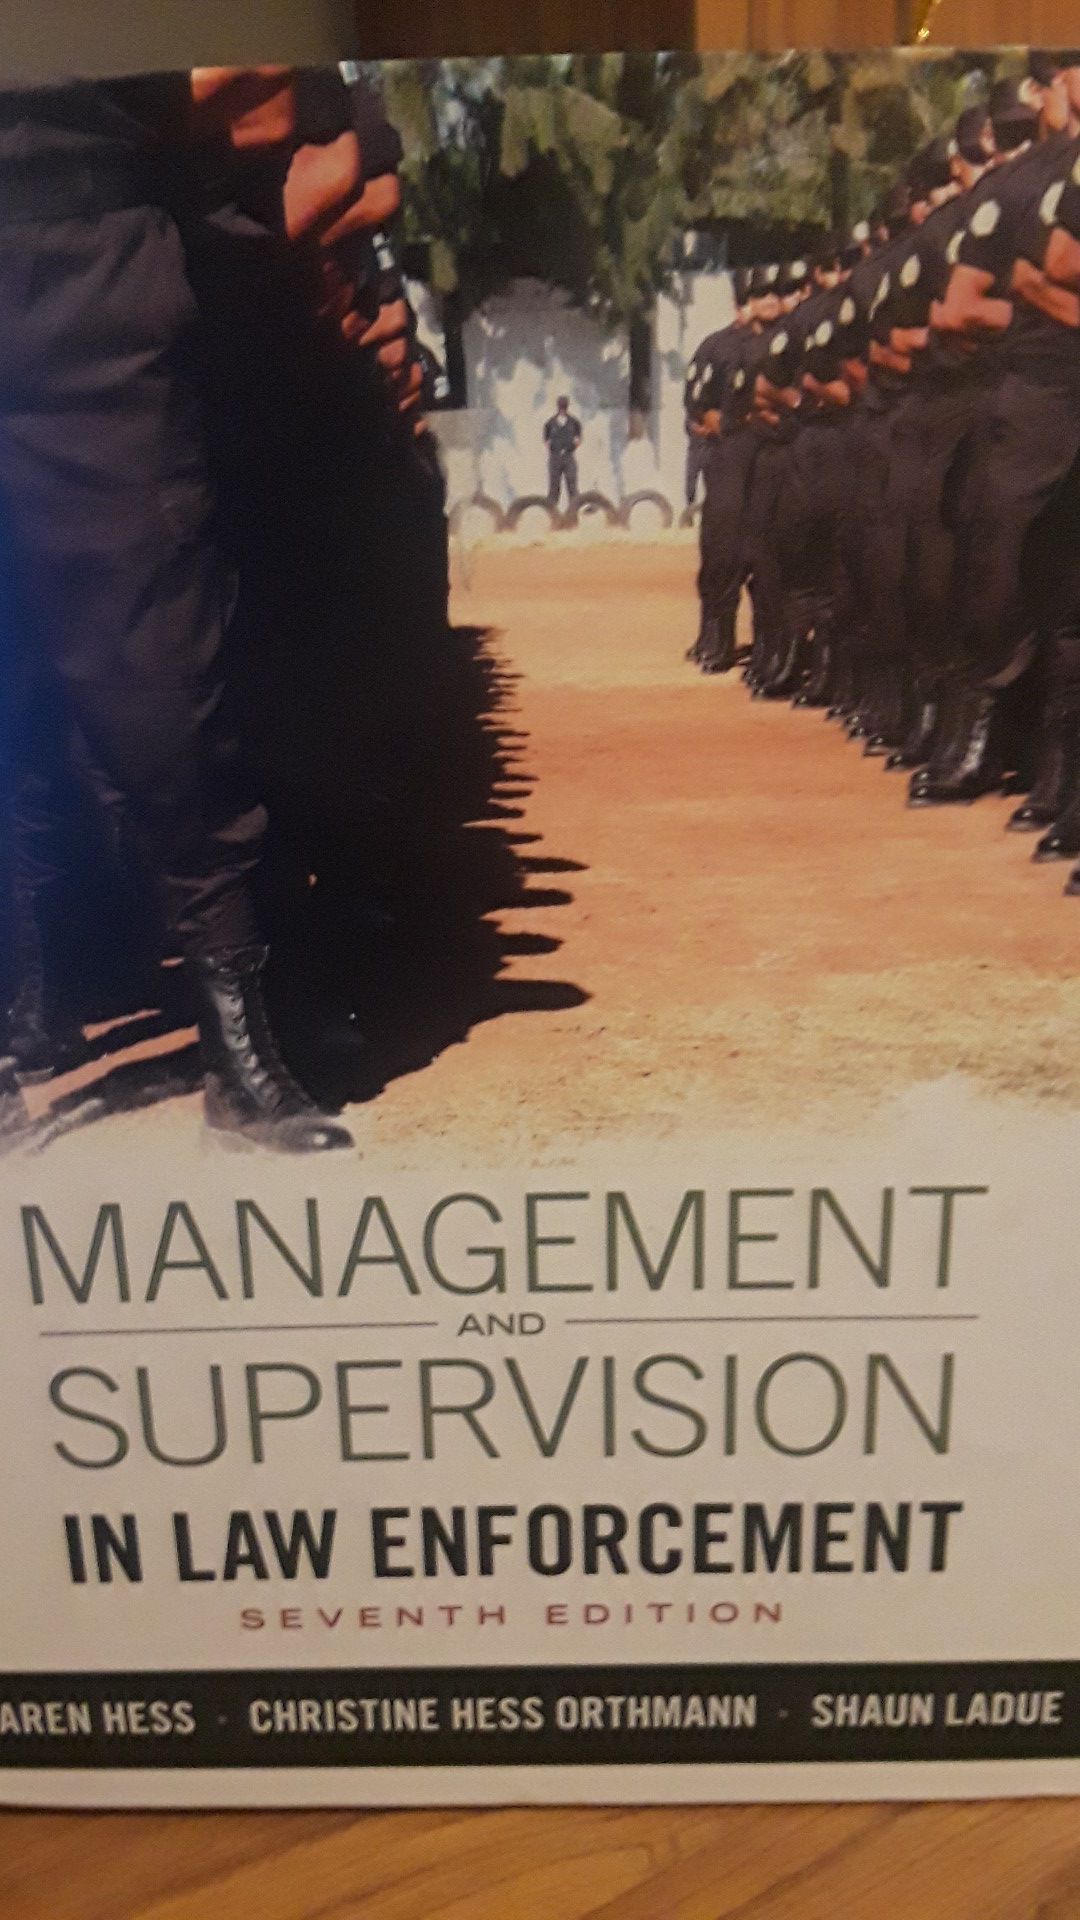 Management and supervision in law enforcement. College textbook